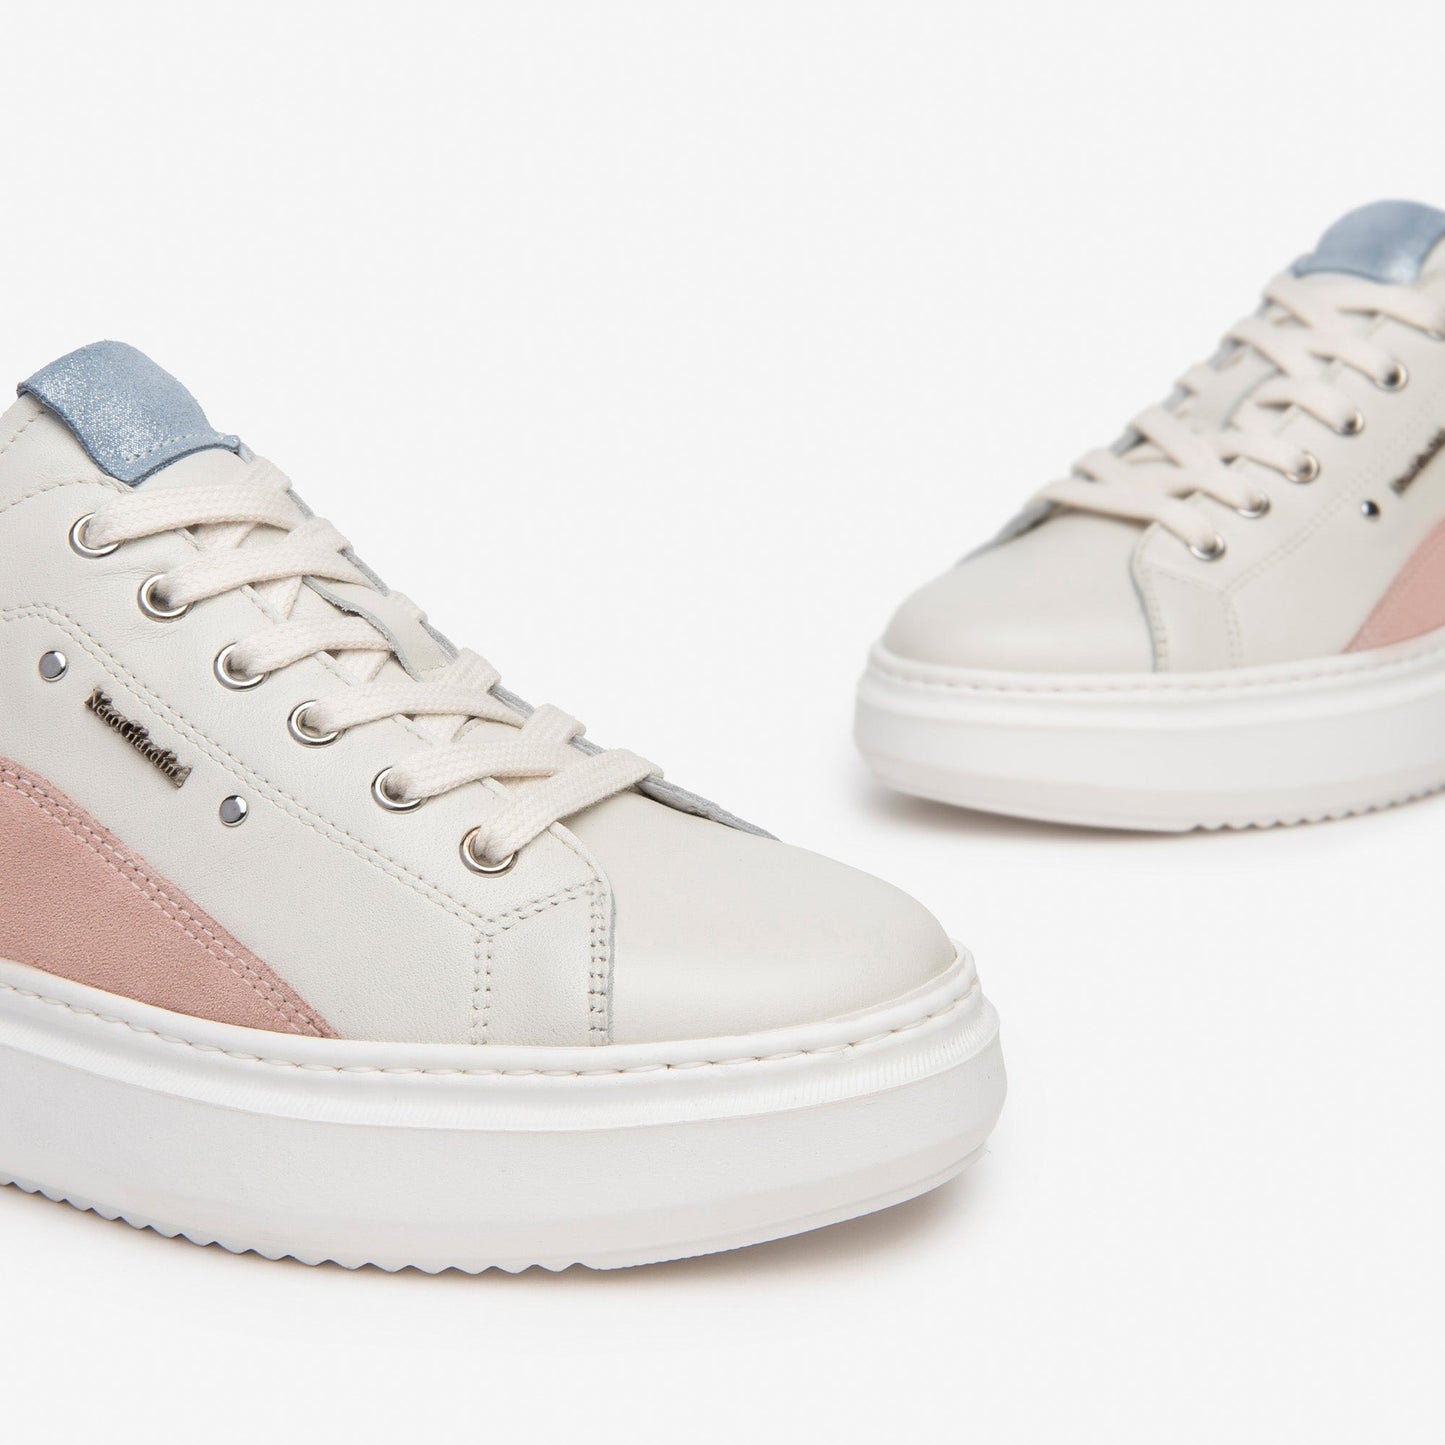 Sneakers NeroGiardini woman white leather suede inserts peony